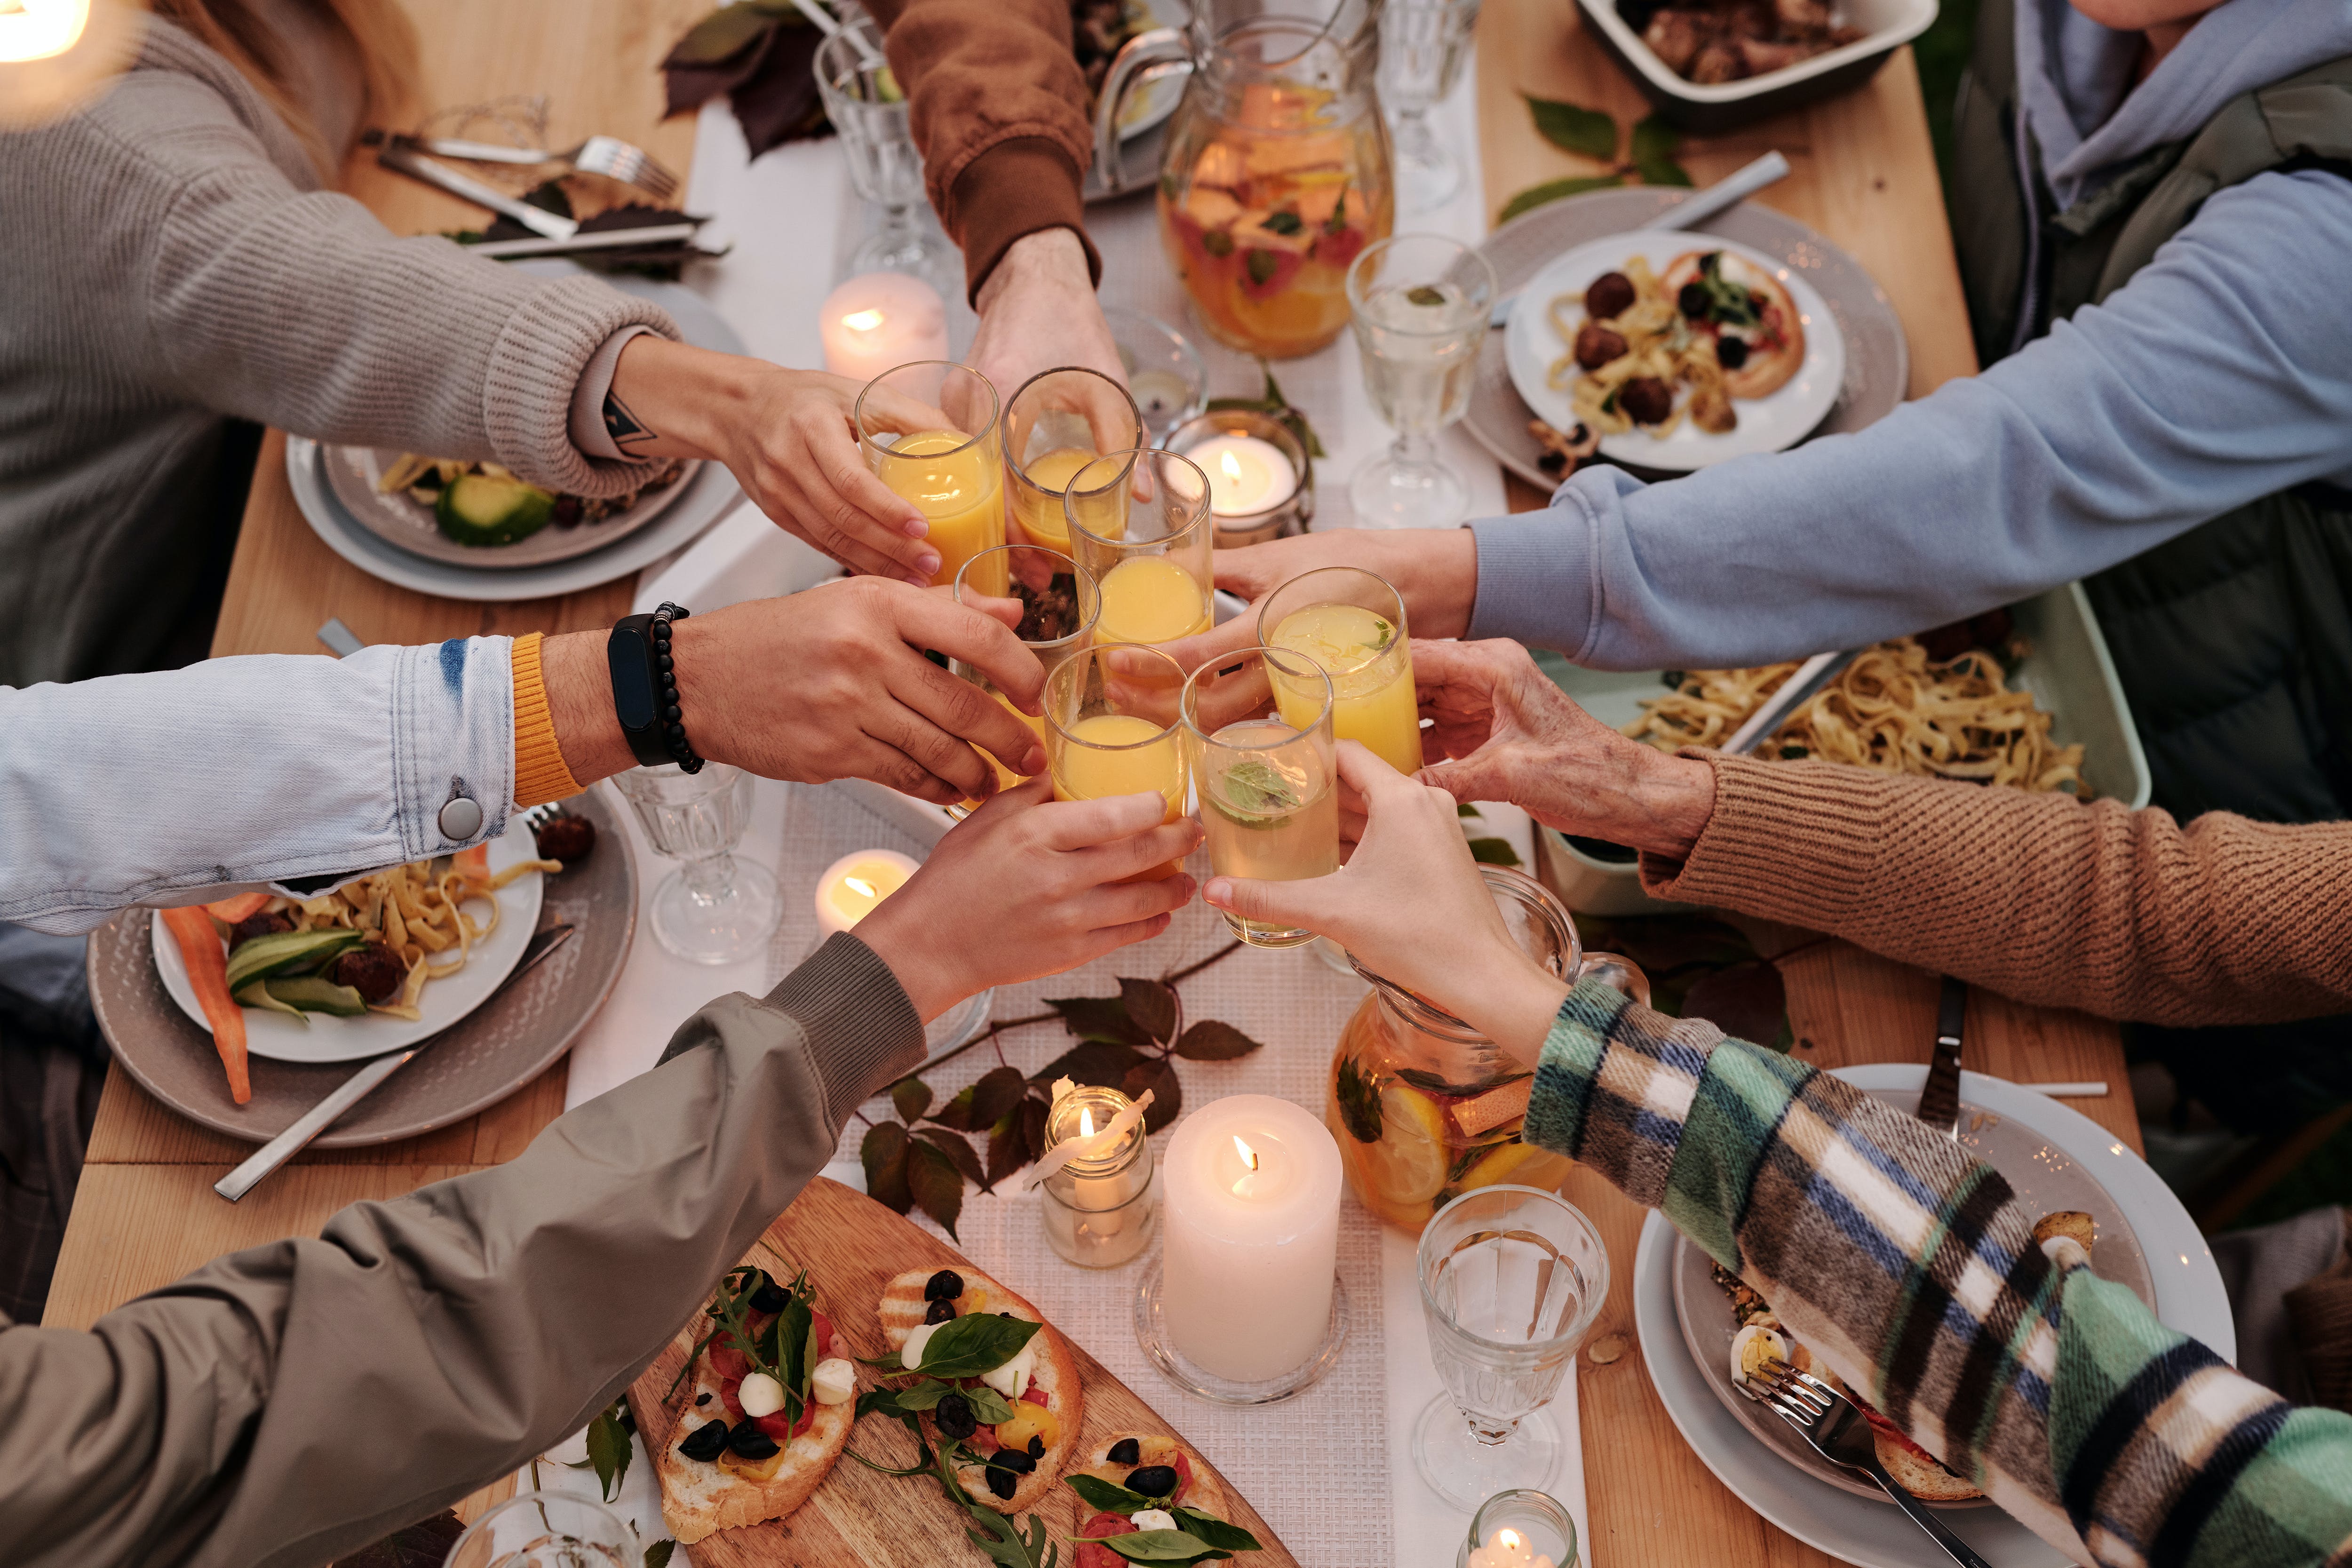 Seven friends sitting around a dinner table with plates of food and candles. Their arms are stretched into the middle of the table raising a toast with their drinks.